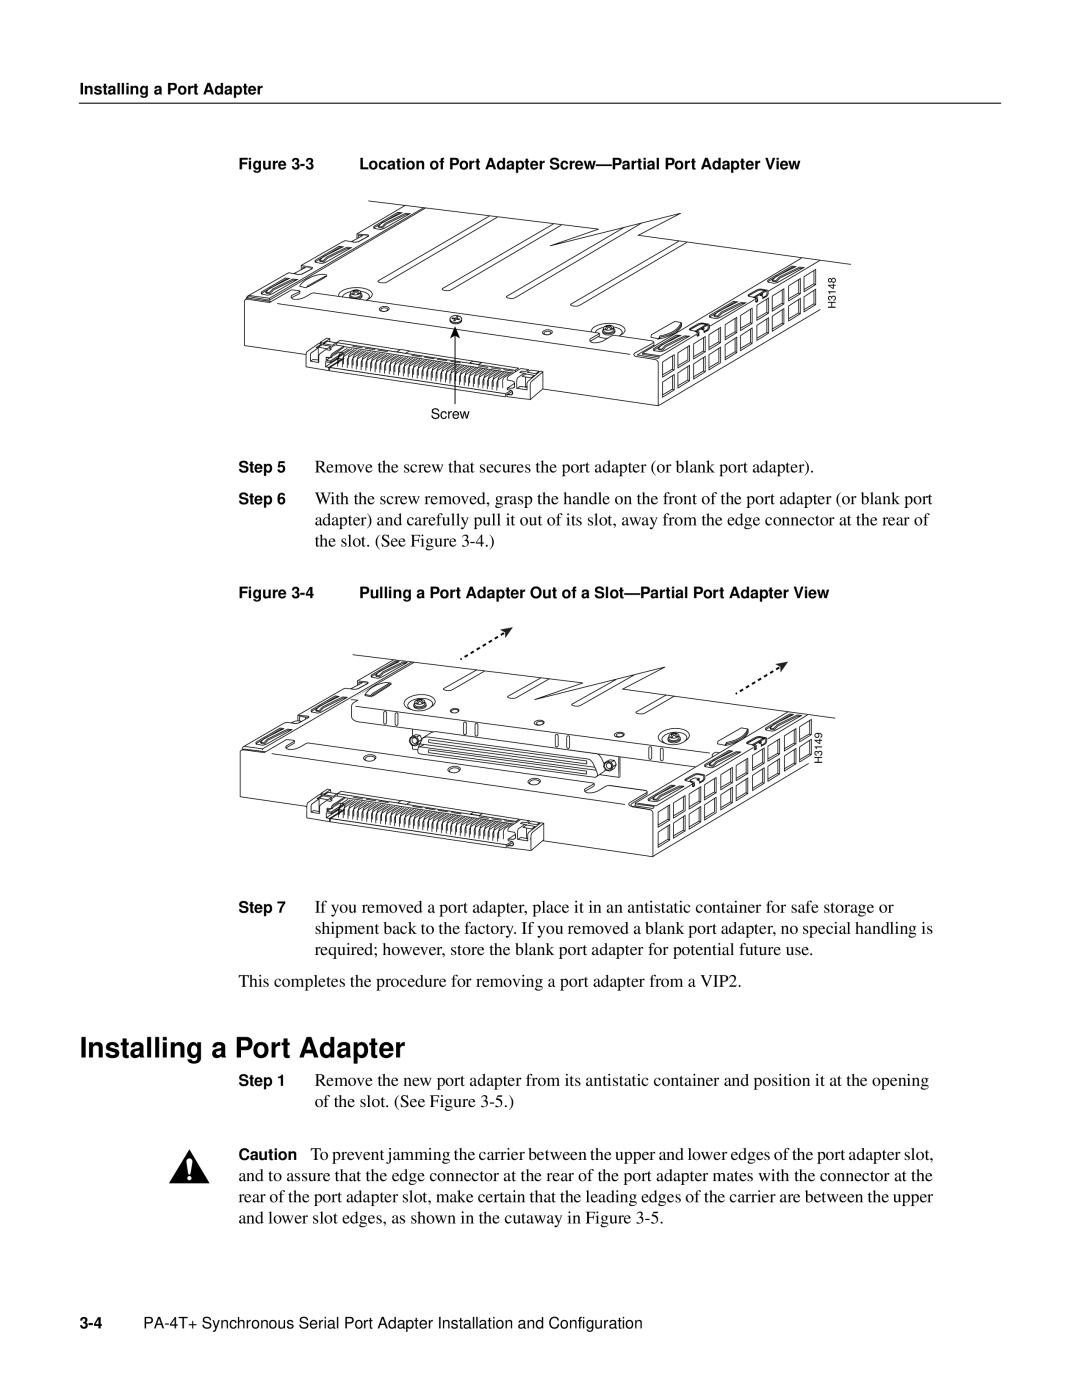 Cisco Systems PA-4T manual Installing a Port Adapter 